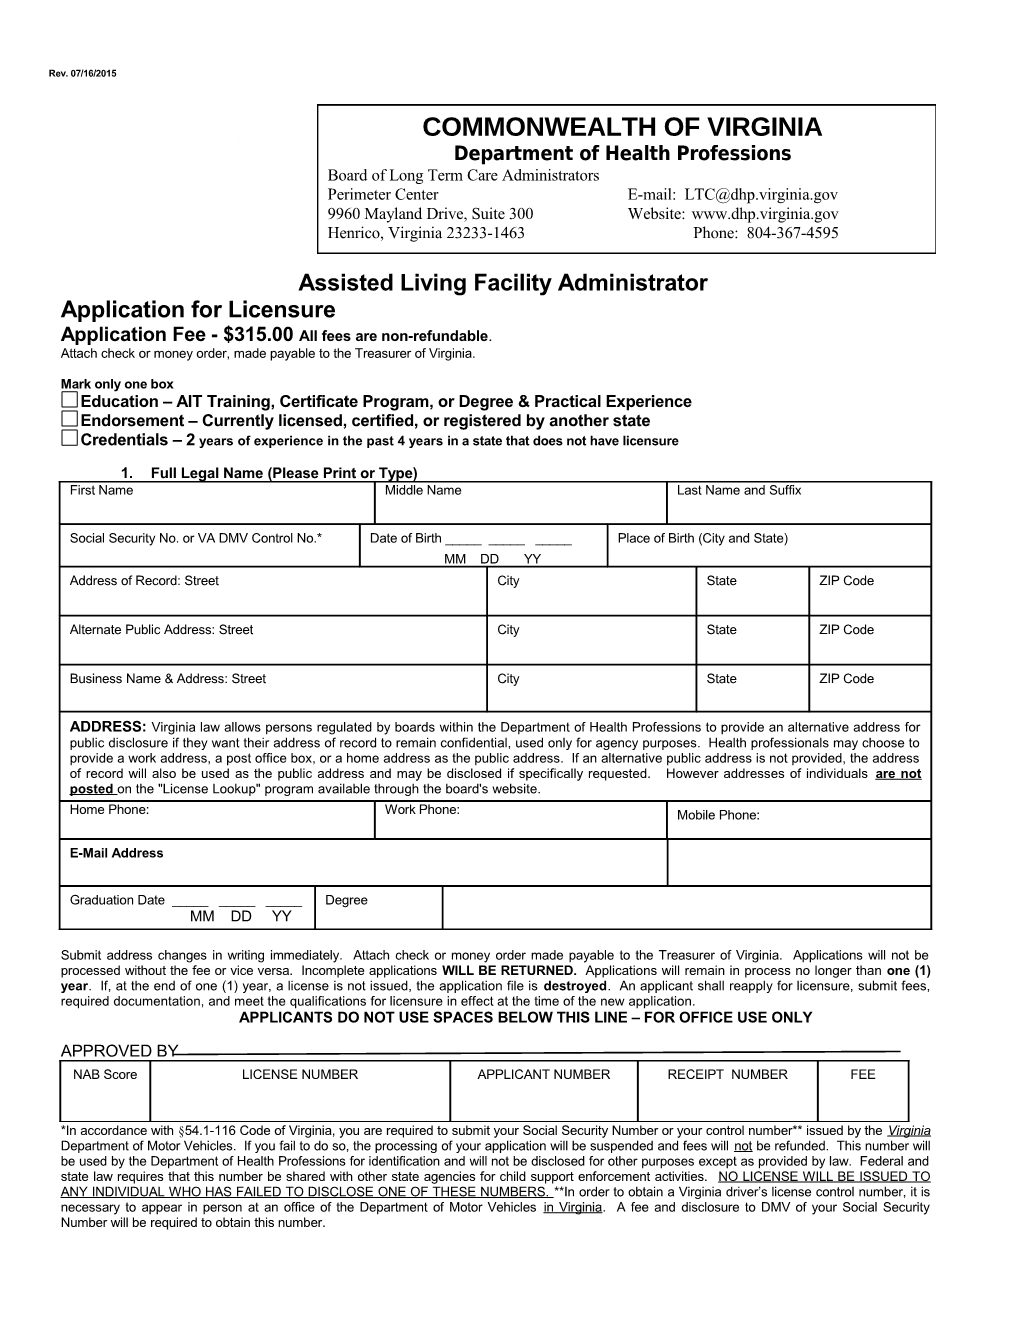 Assisted Living Facility Administrator Application for Licensure